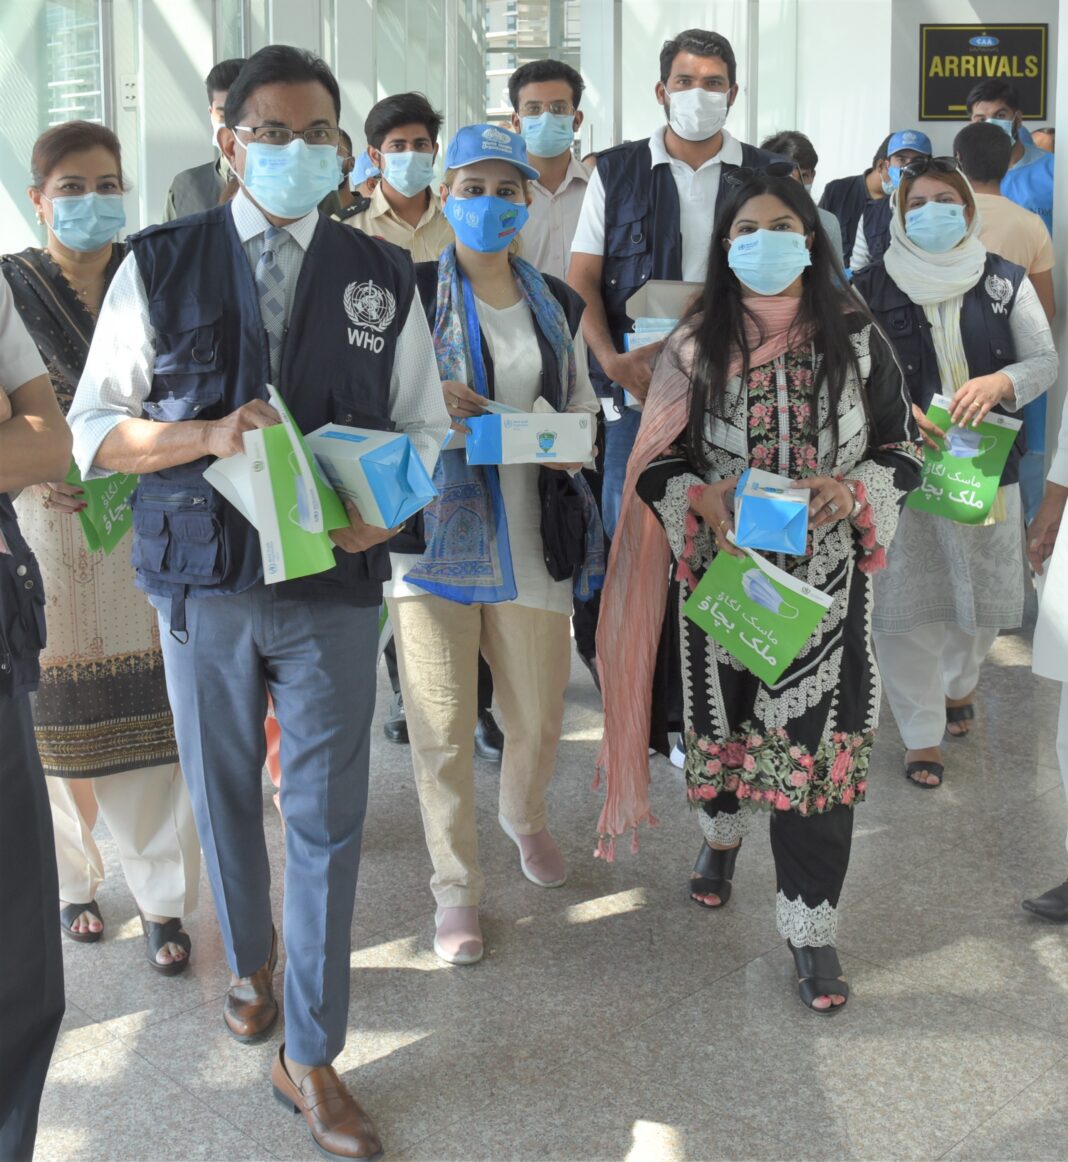 WHO launched “Wear Mask, Protect Pakistan” Campaign